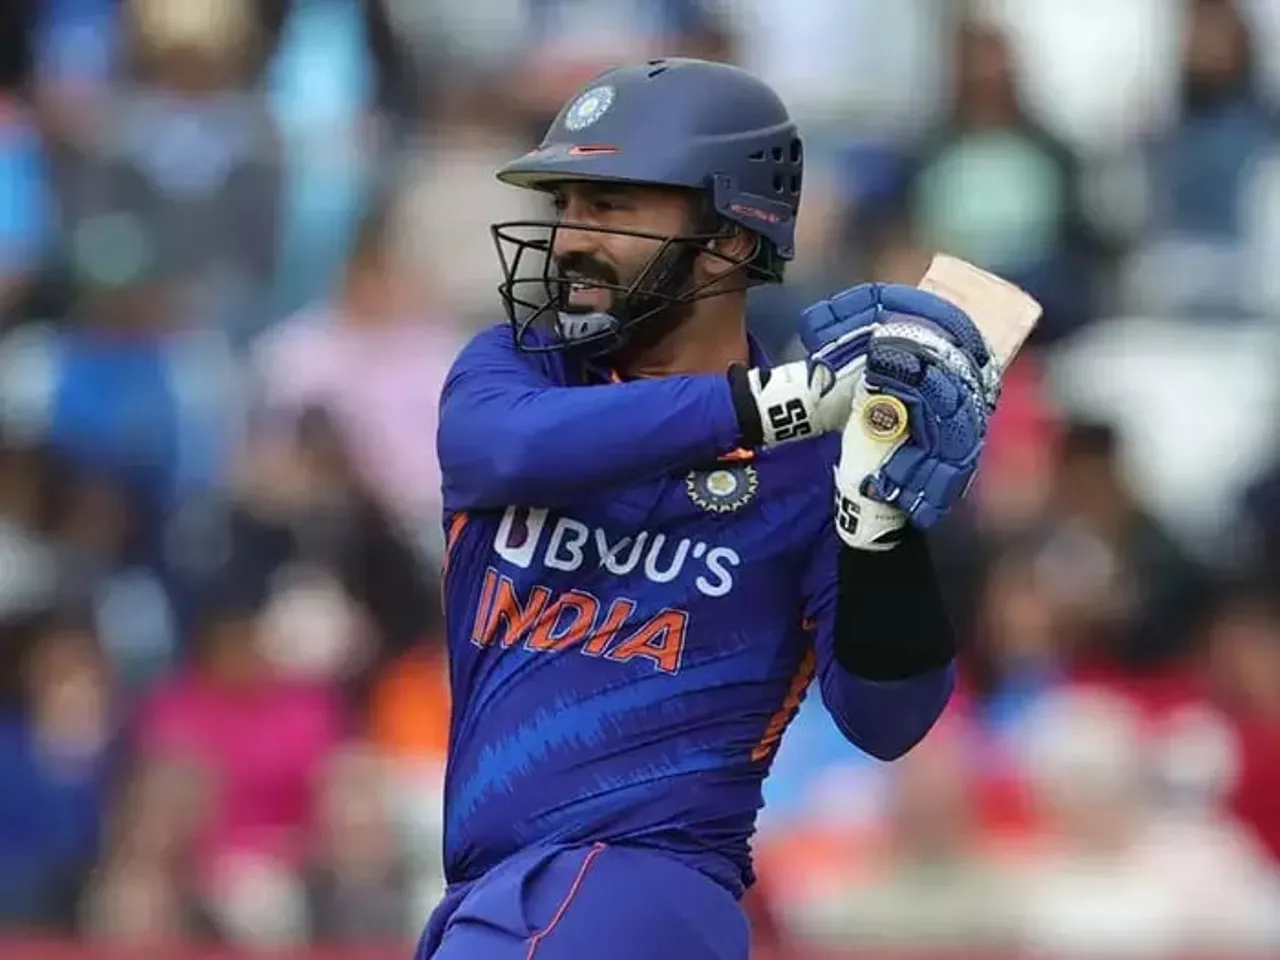 "He is certainty now for T20 World Cup in Australia" BCCI selector on Dinesh Karthik